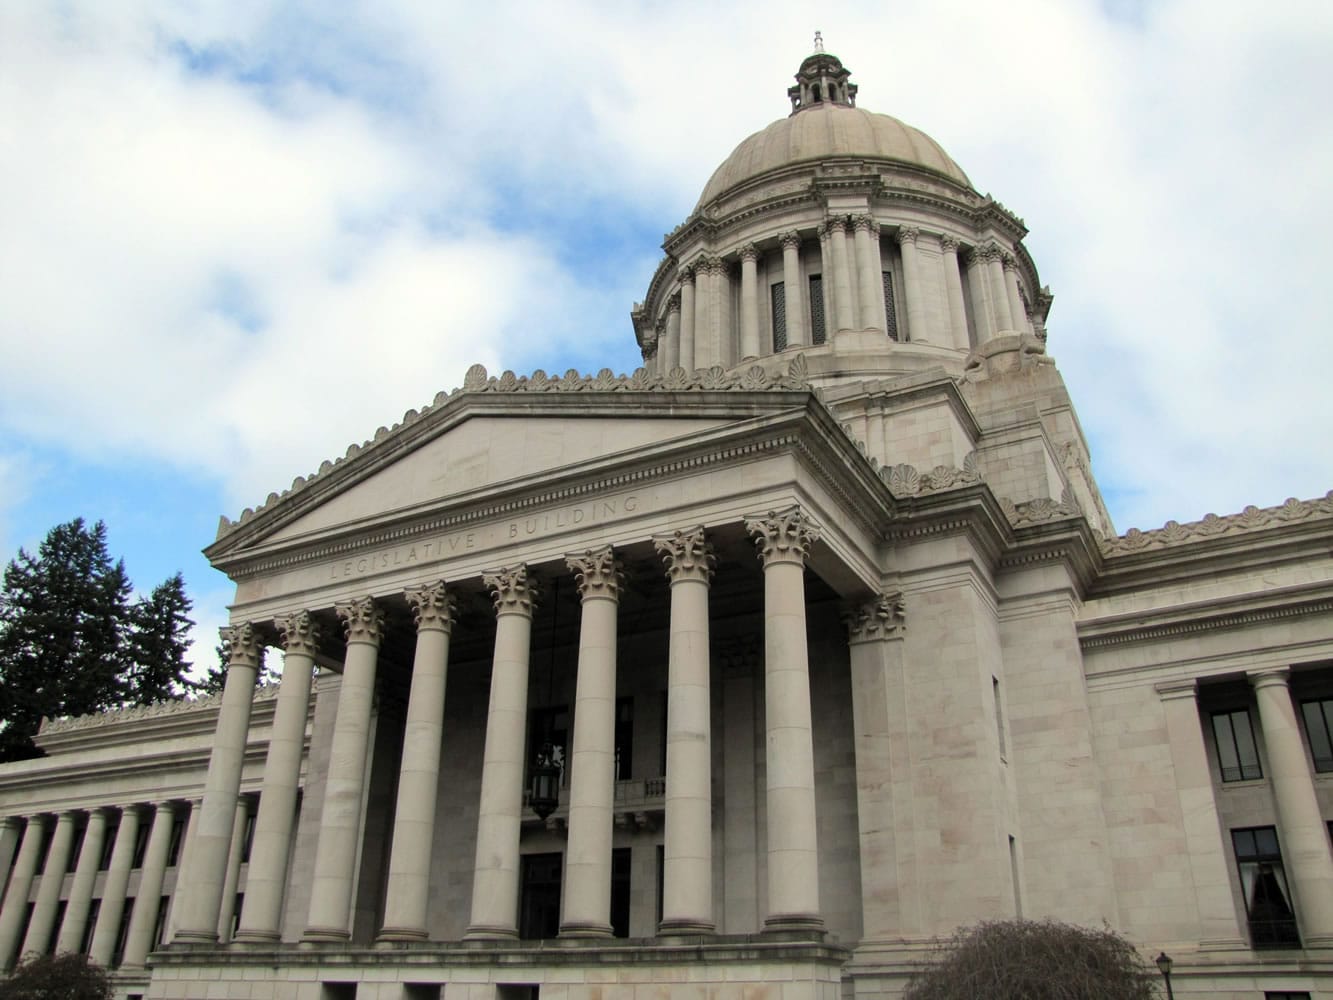 The legislative building in Olympia houses the Senate and House chambers.